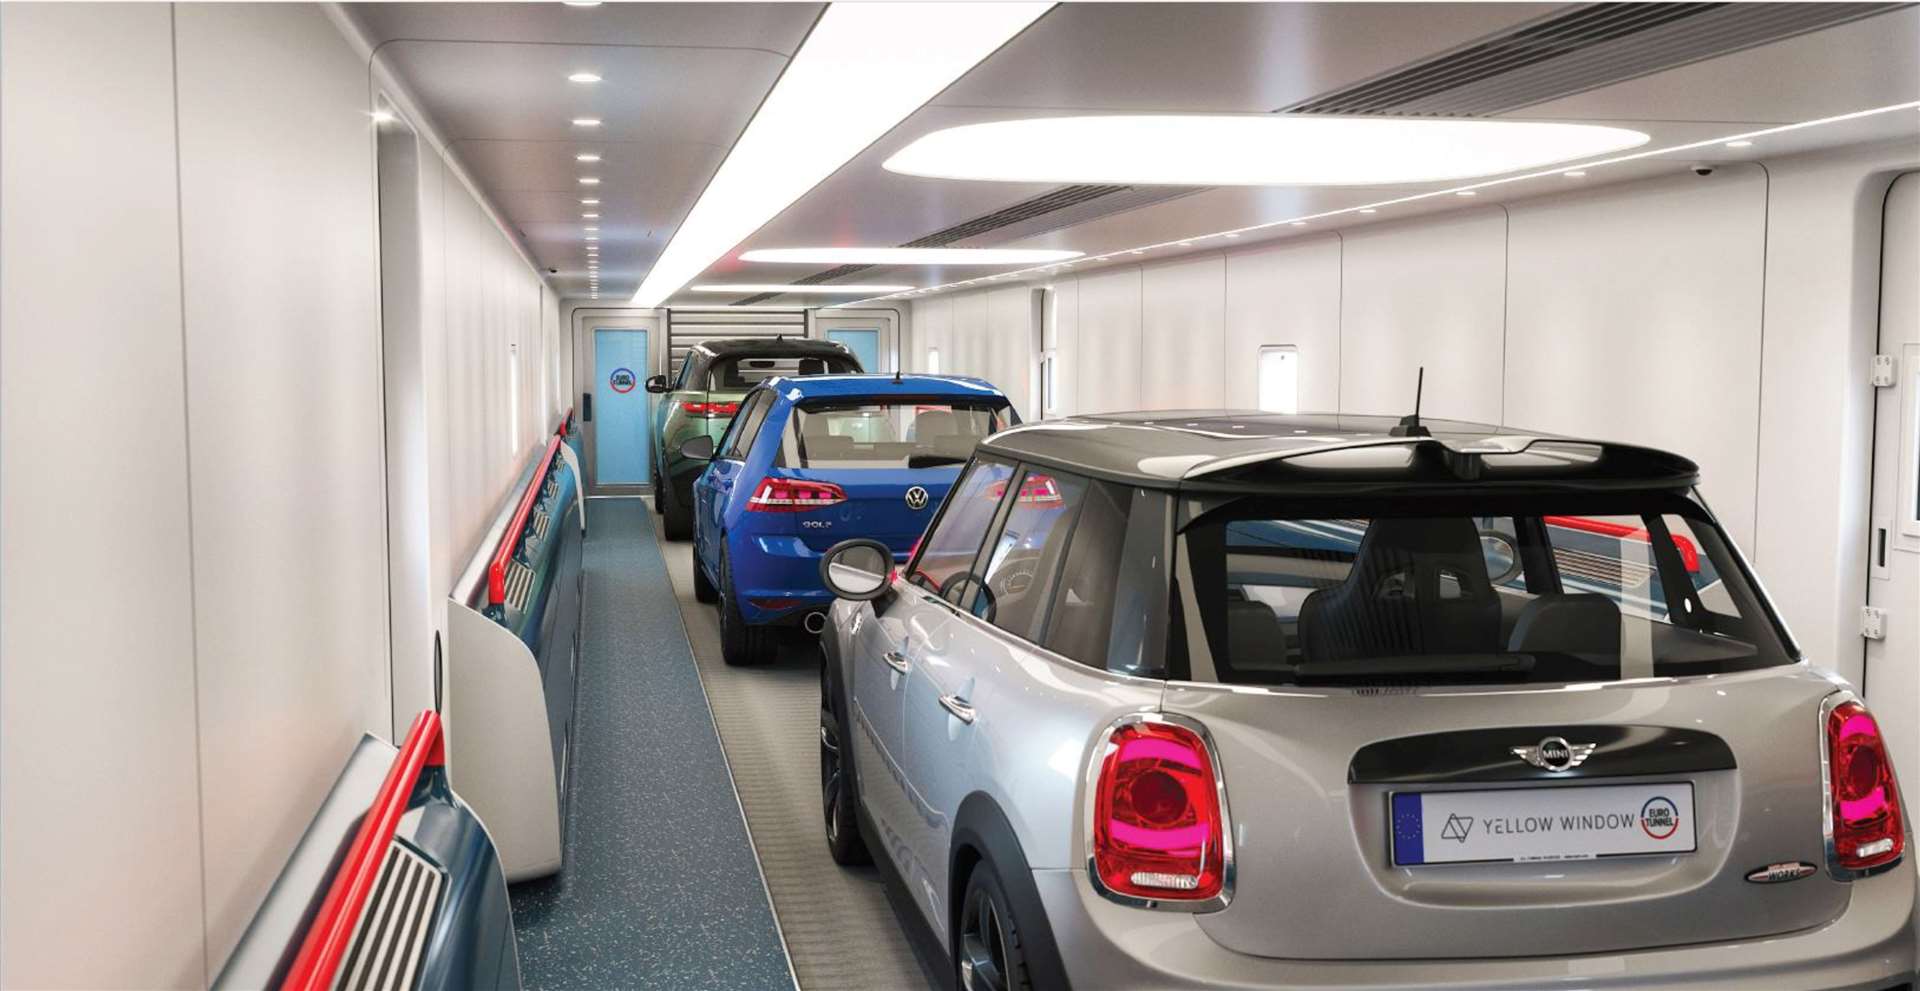 How the passenger shuttles could look once renovated. Credit: Eurotunnel (7932961)